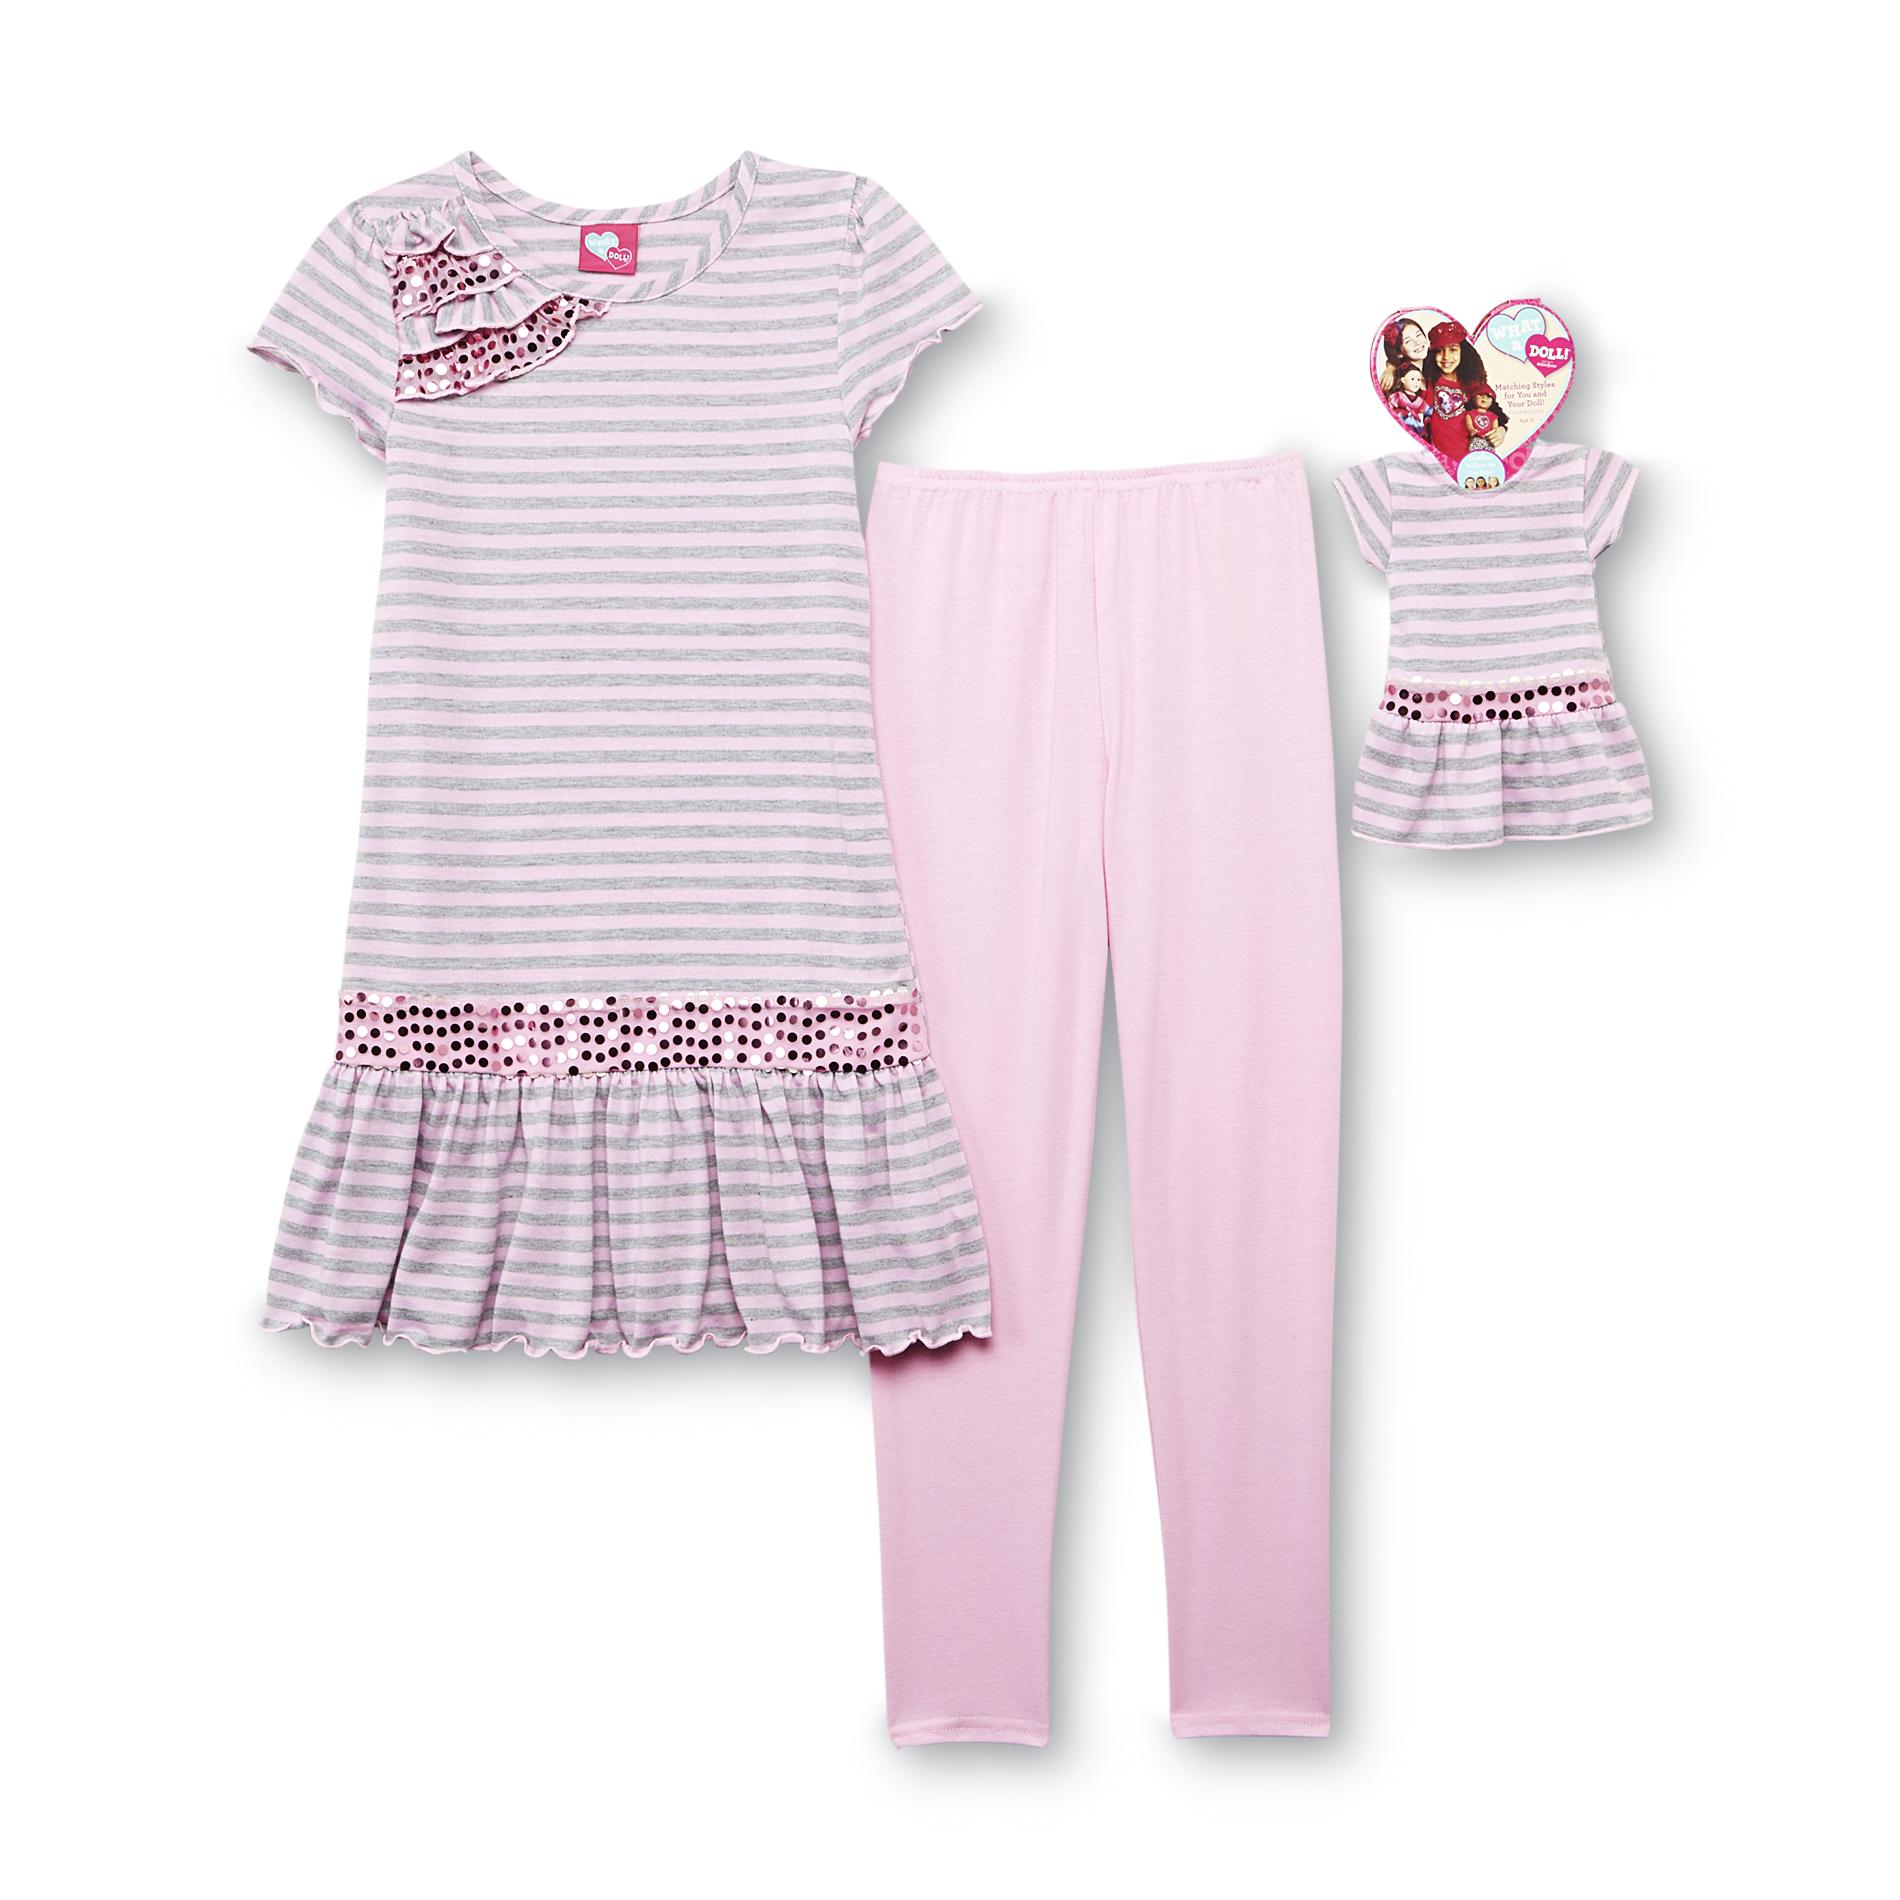 What A Doll Girl's Tunic  Leggings & Doll Dress - Striped